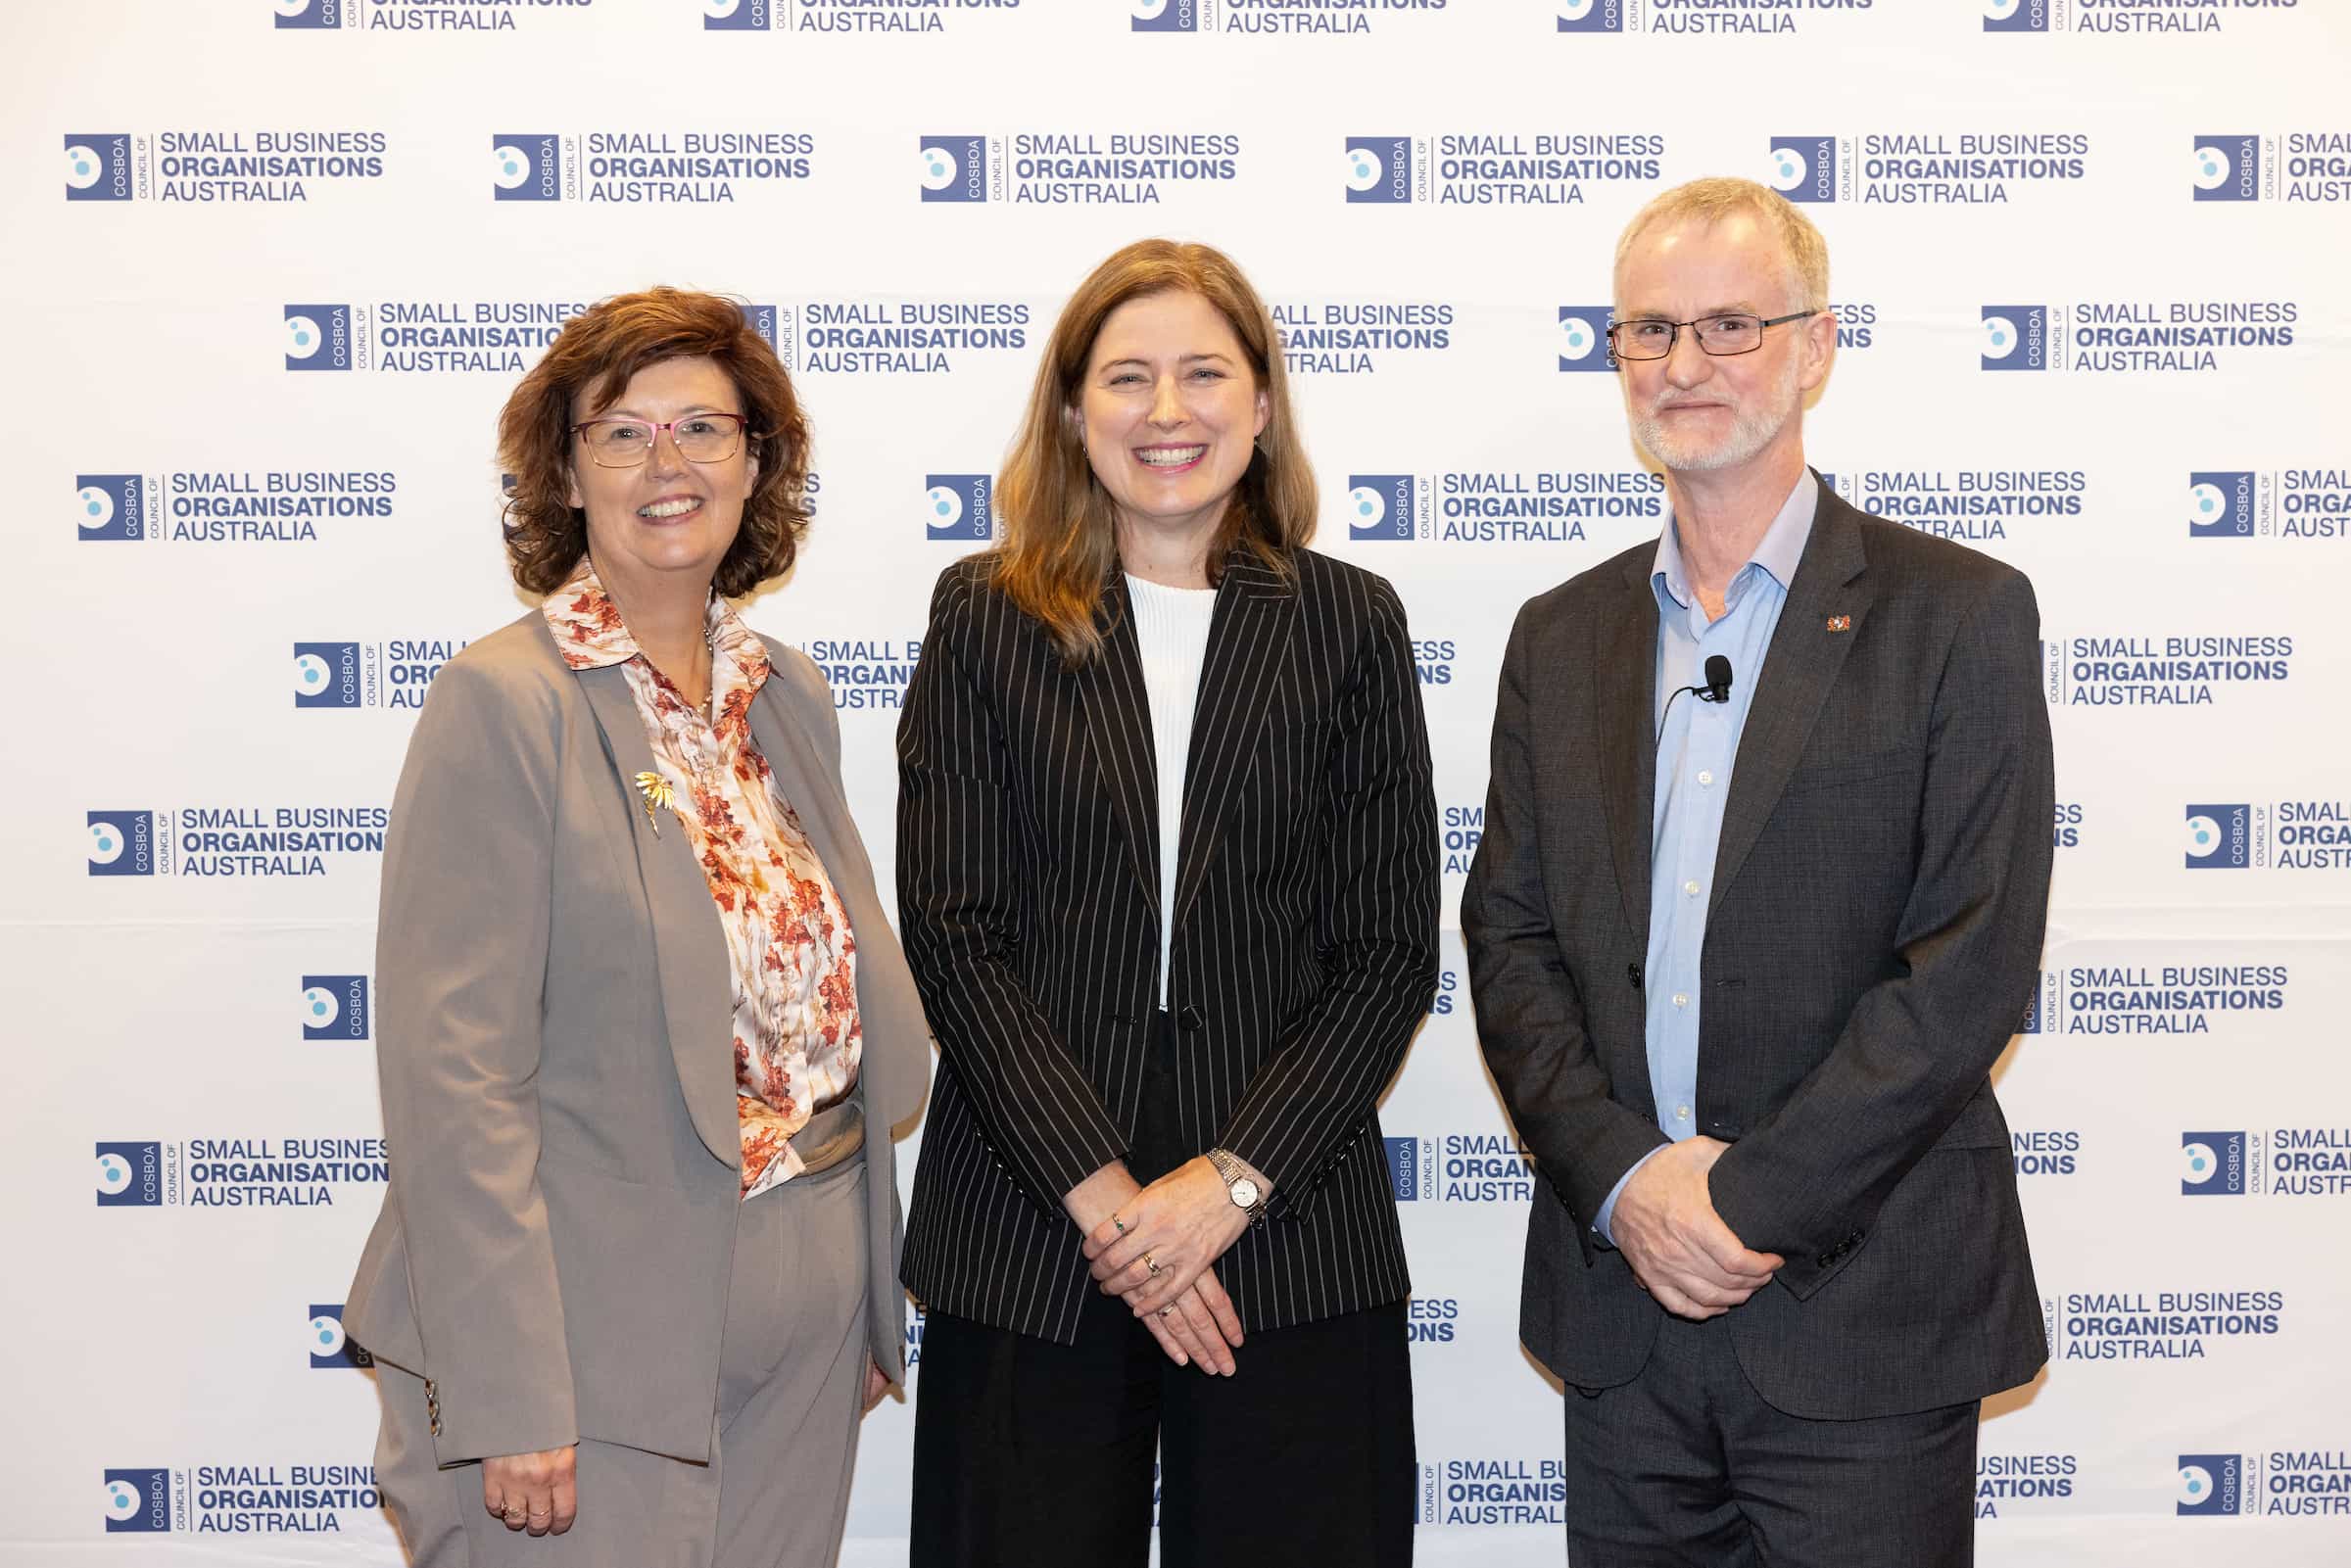 Three people are standing in front of a backdrop with the logo and text "Small Business Organisations Australia." They are smiling and dressed in business attire. The woman on the left wears a beige suit, the woman in the middle wears a black suit, and both exemplify successful women in business as they stand with their male colleague.